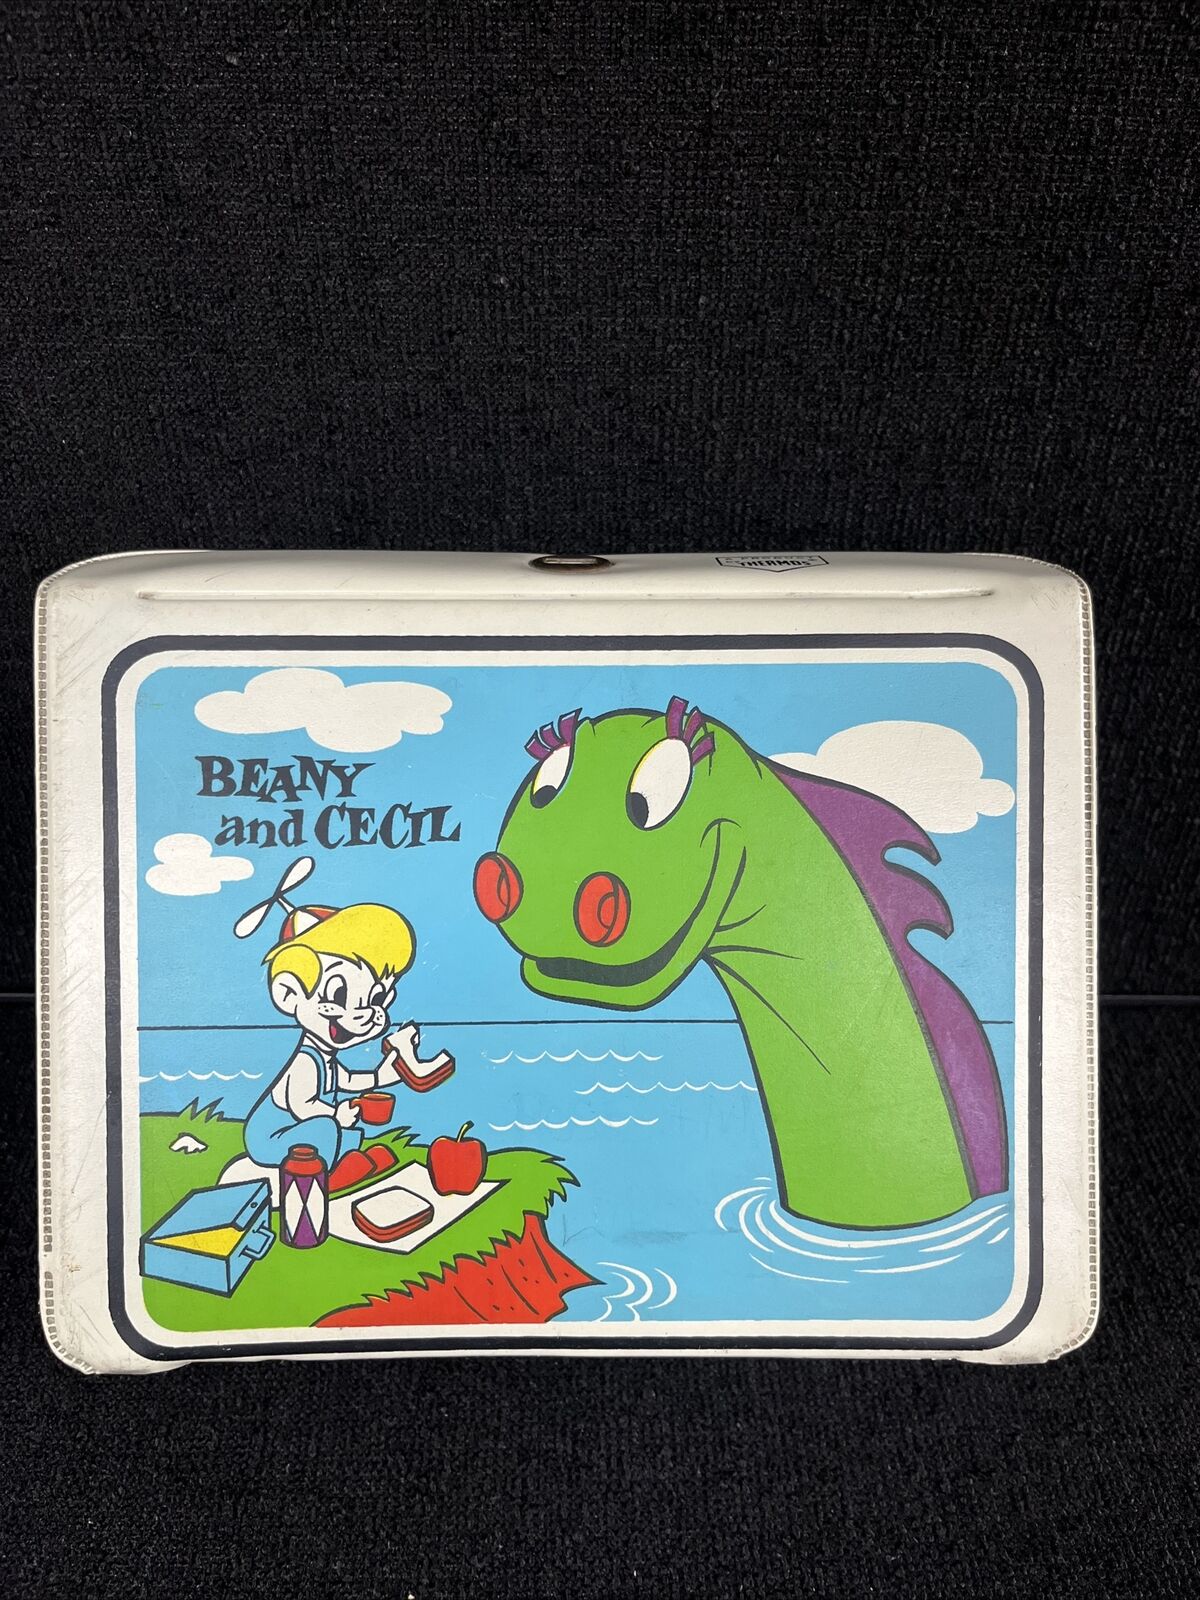 Vintage Beany And Cecil Lunchbox No Thermos 1961 Vinyl